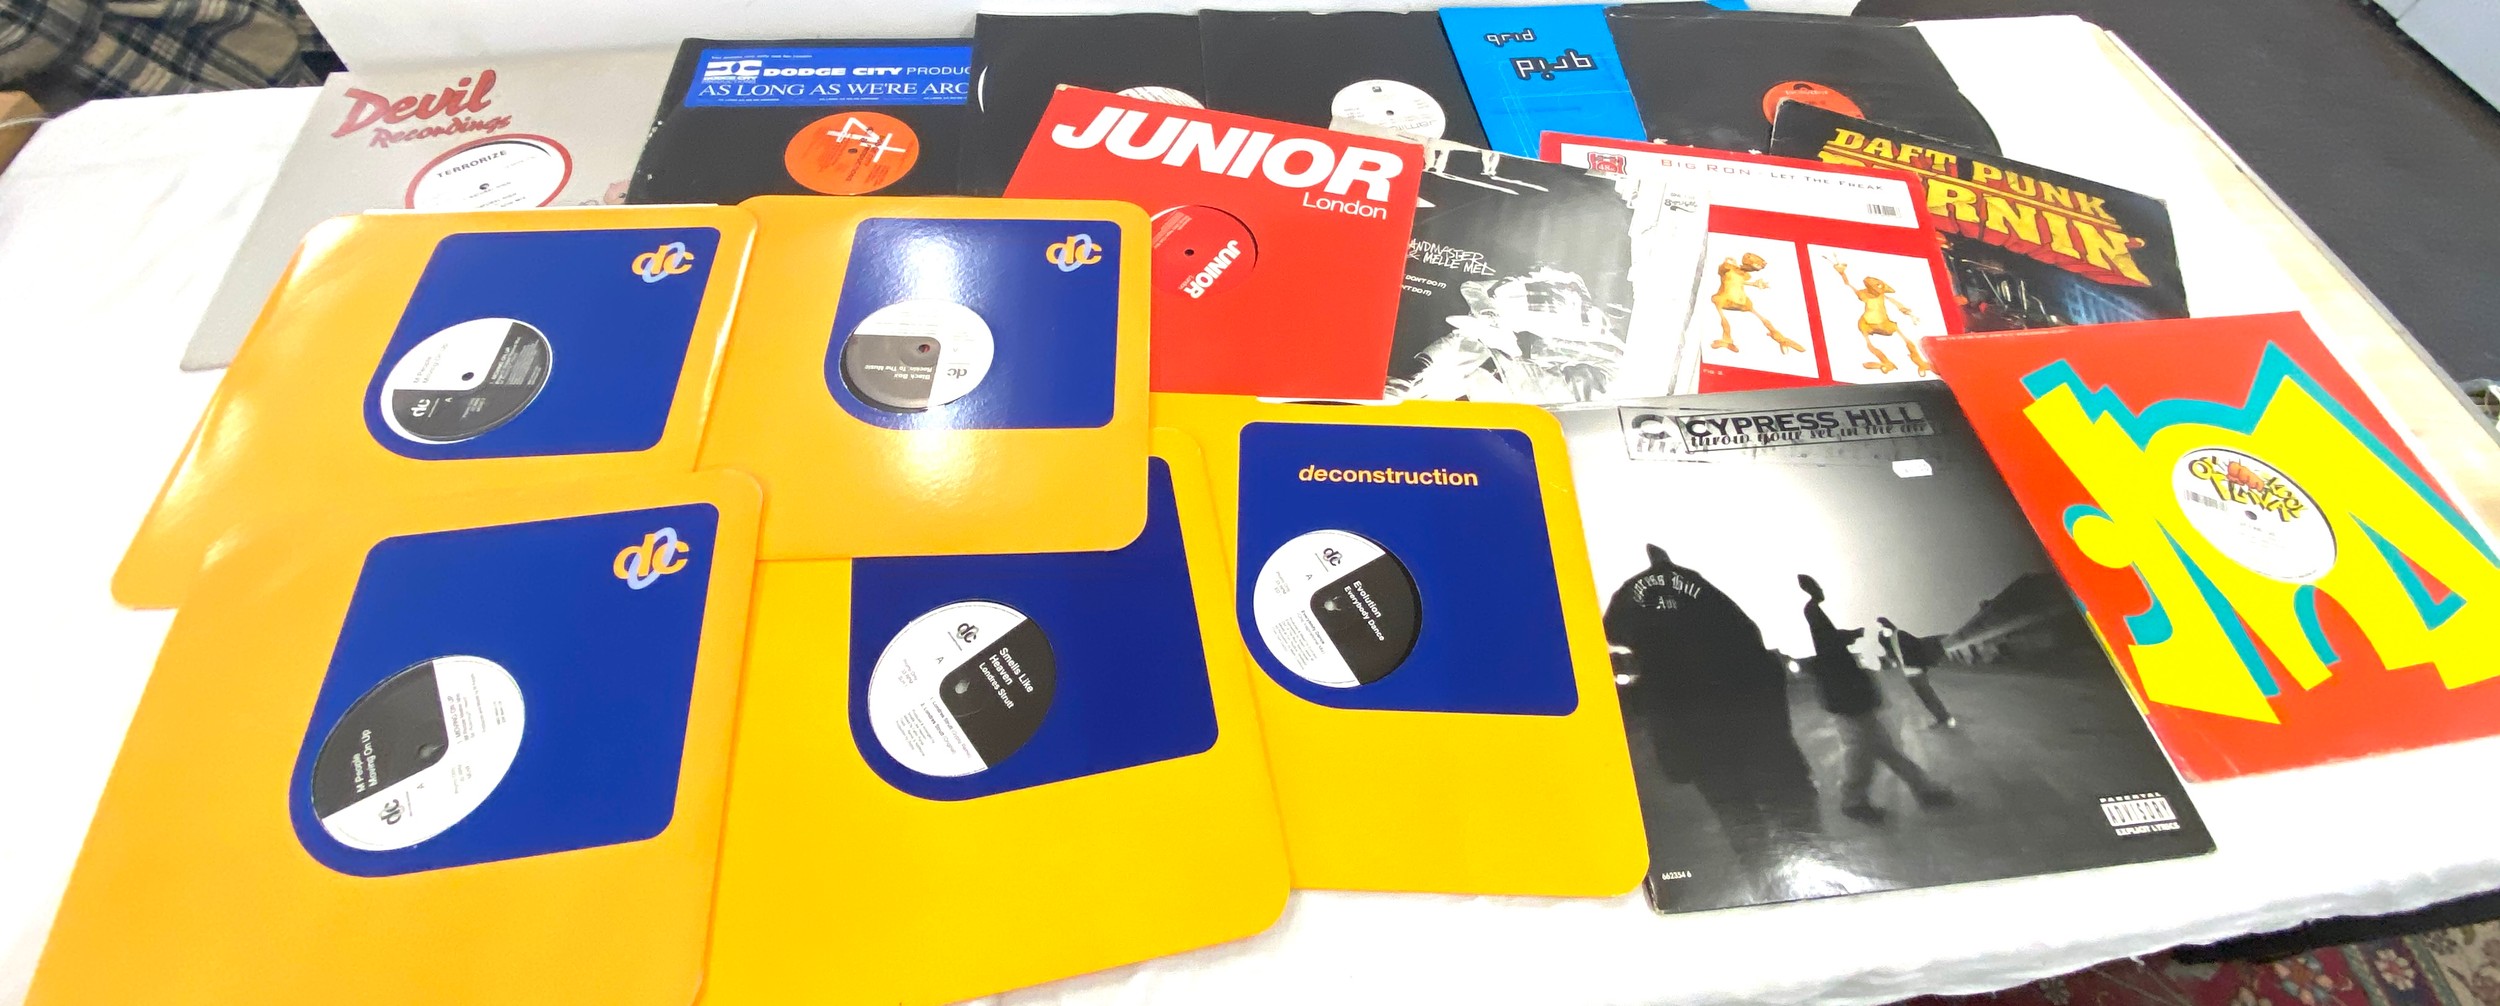 Selection of assorted dance/ R&B 12inch singles includes Grid, Didge City, Junior London, etc approx